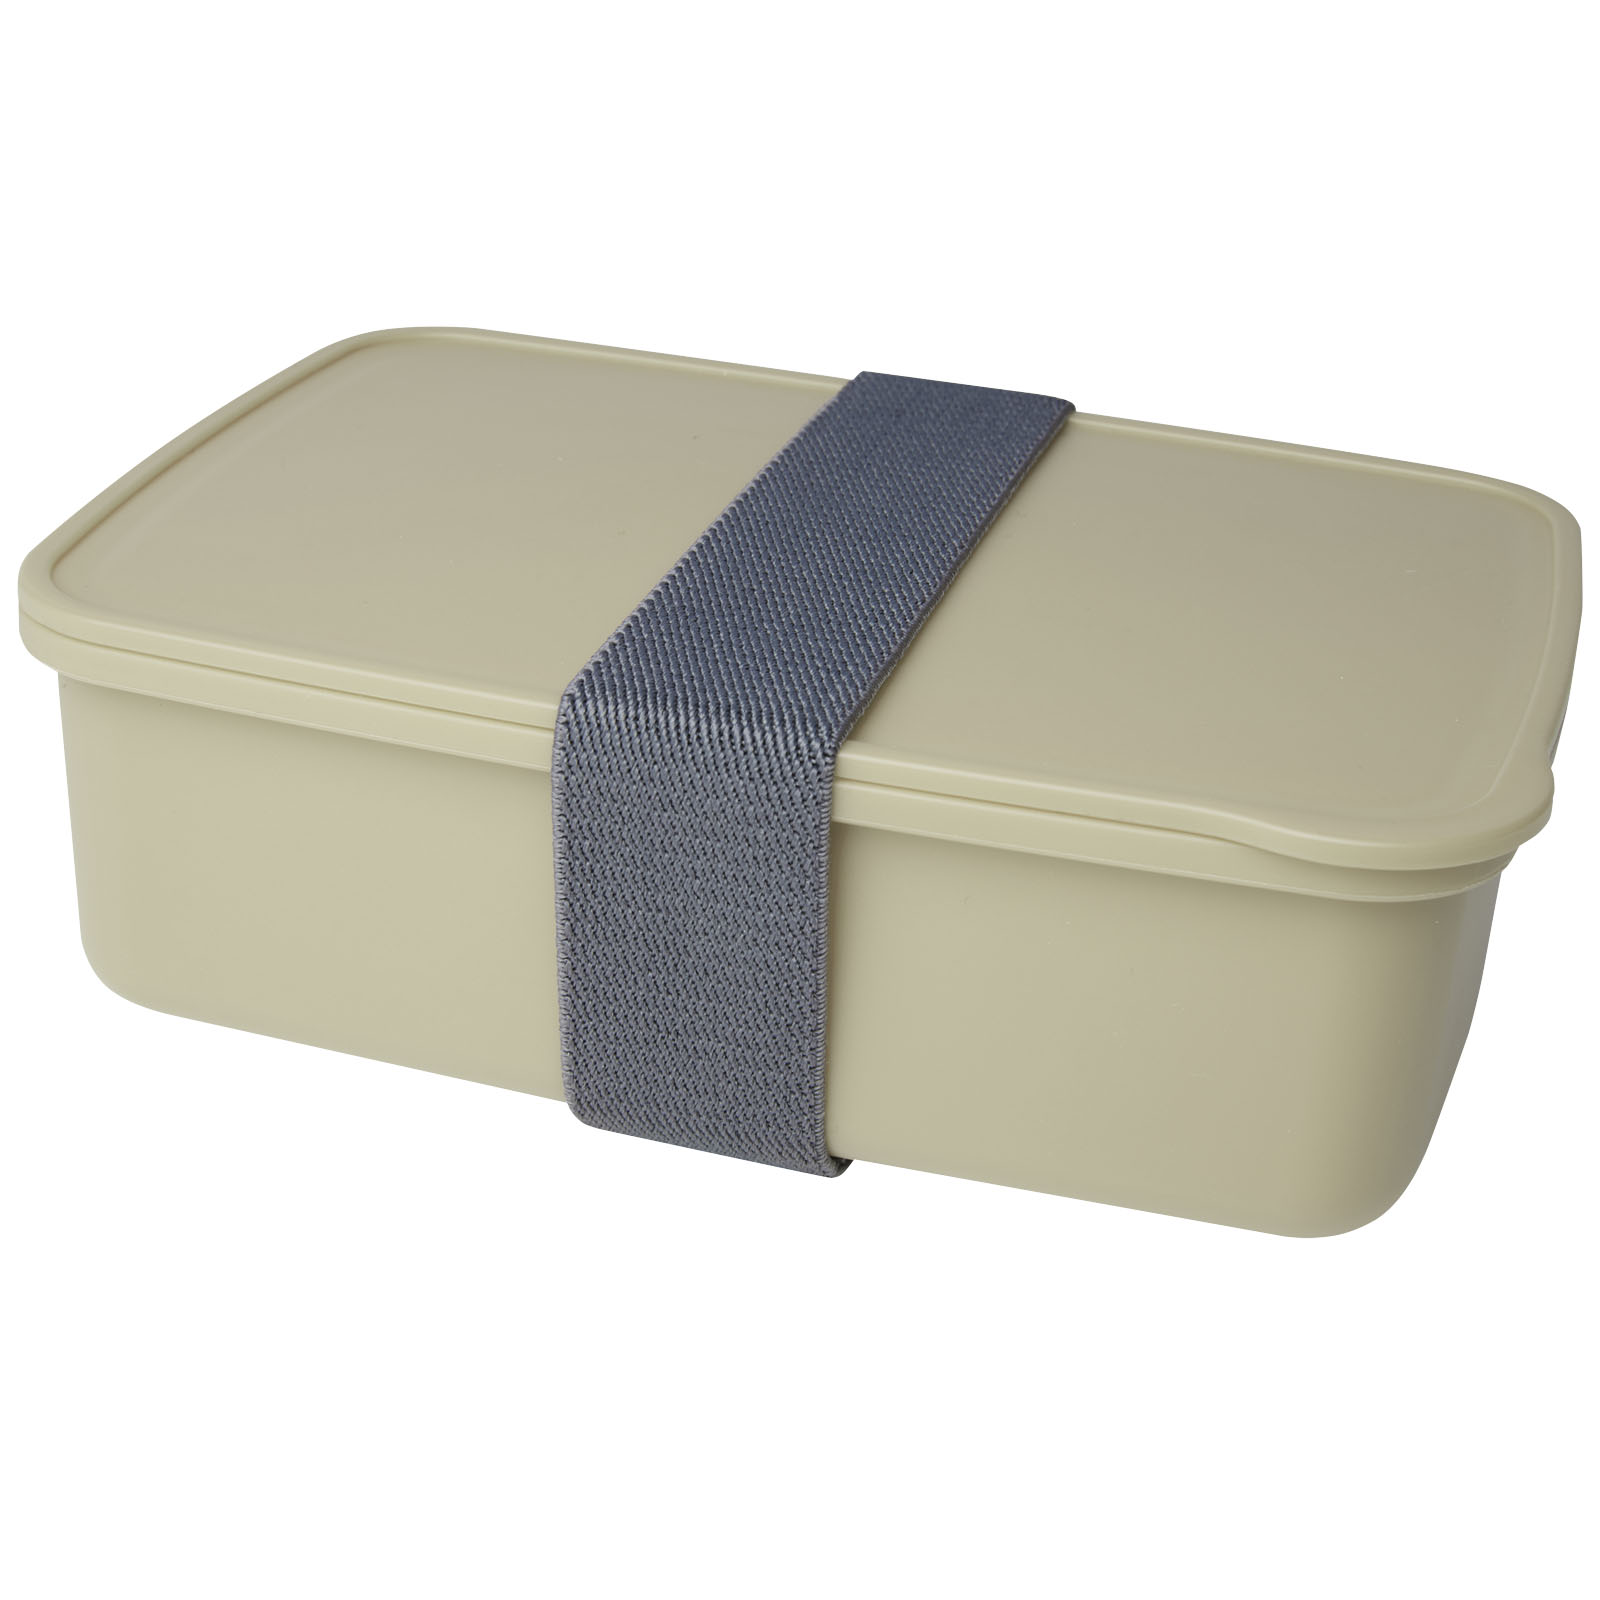 Advertising Lunch Boxes - Dovi recycled plastic lunch box